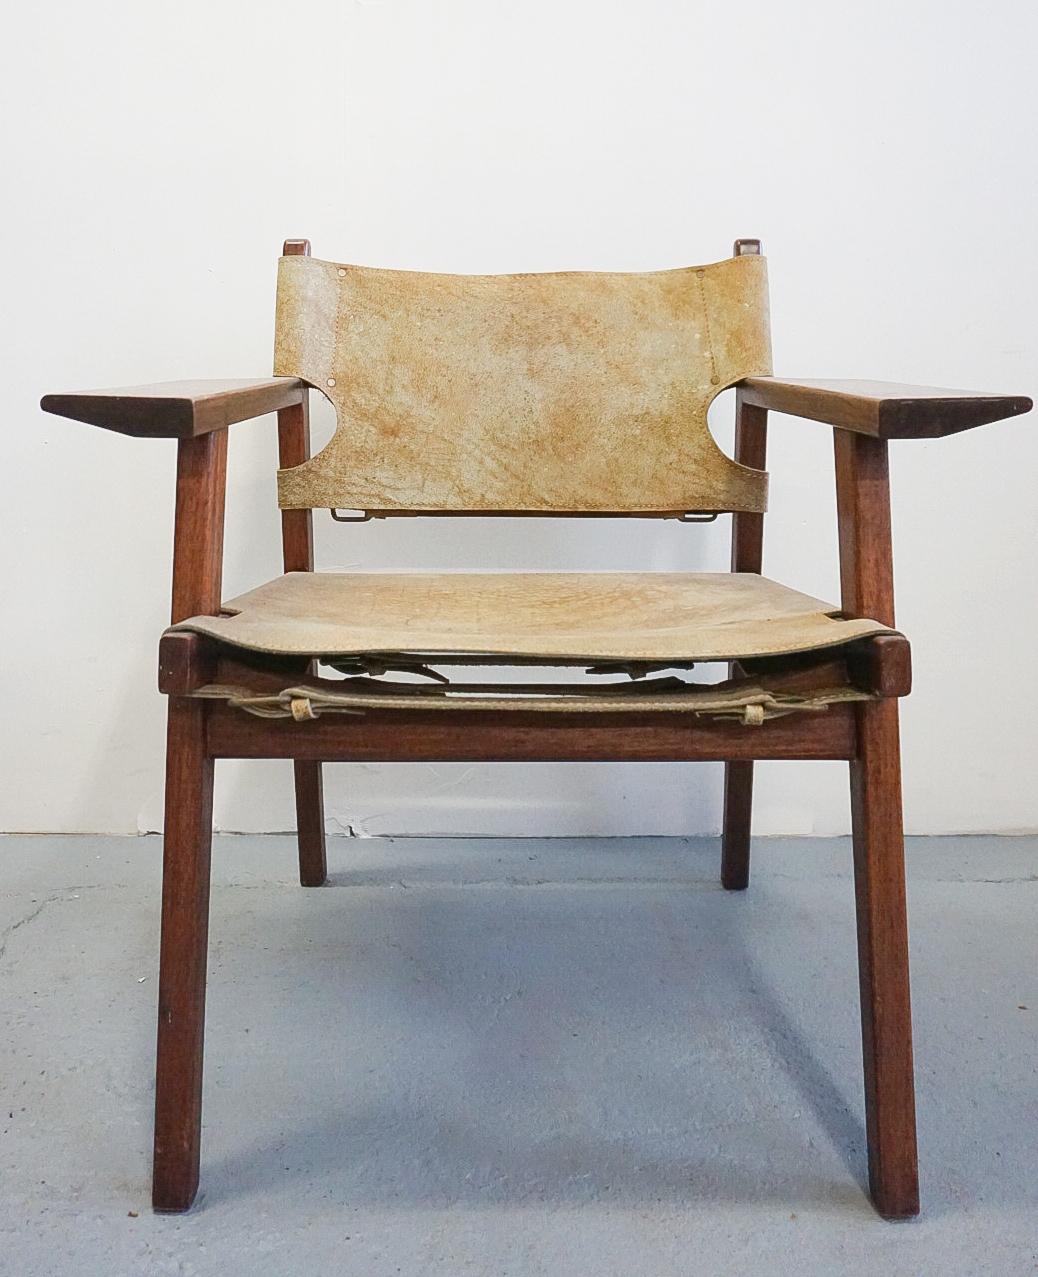 Beautifully crafted vintage chair very similar to Borge Mogensen's 'Spanish chair'. The frame is solid Mahogany and sling is thick suede cowhide, suspended with brass buckles.

The frame is in excellent condition, very sturdy and superb oiled